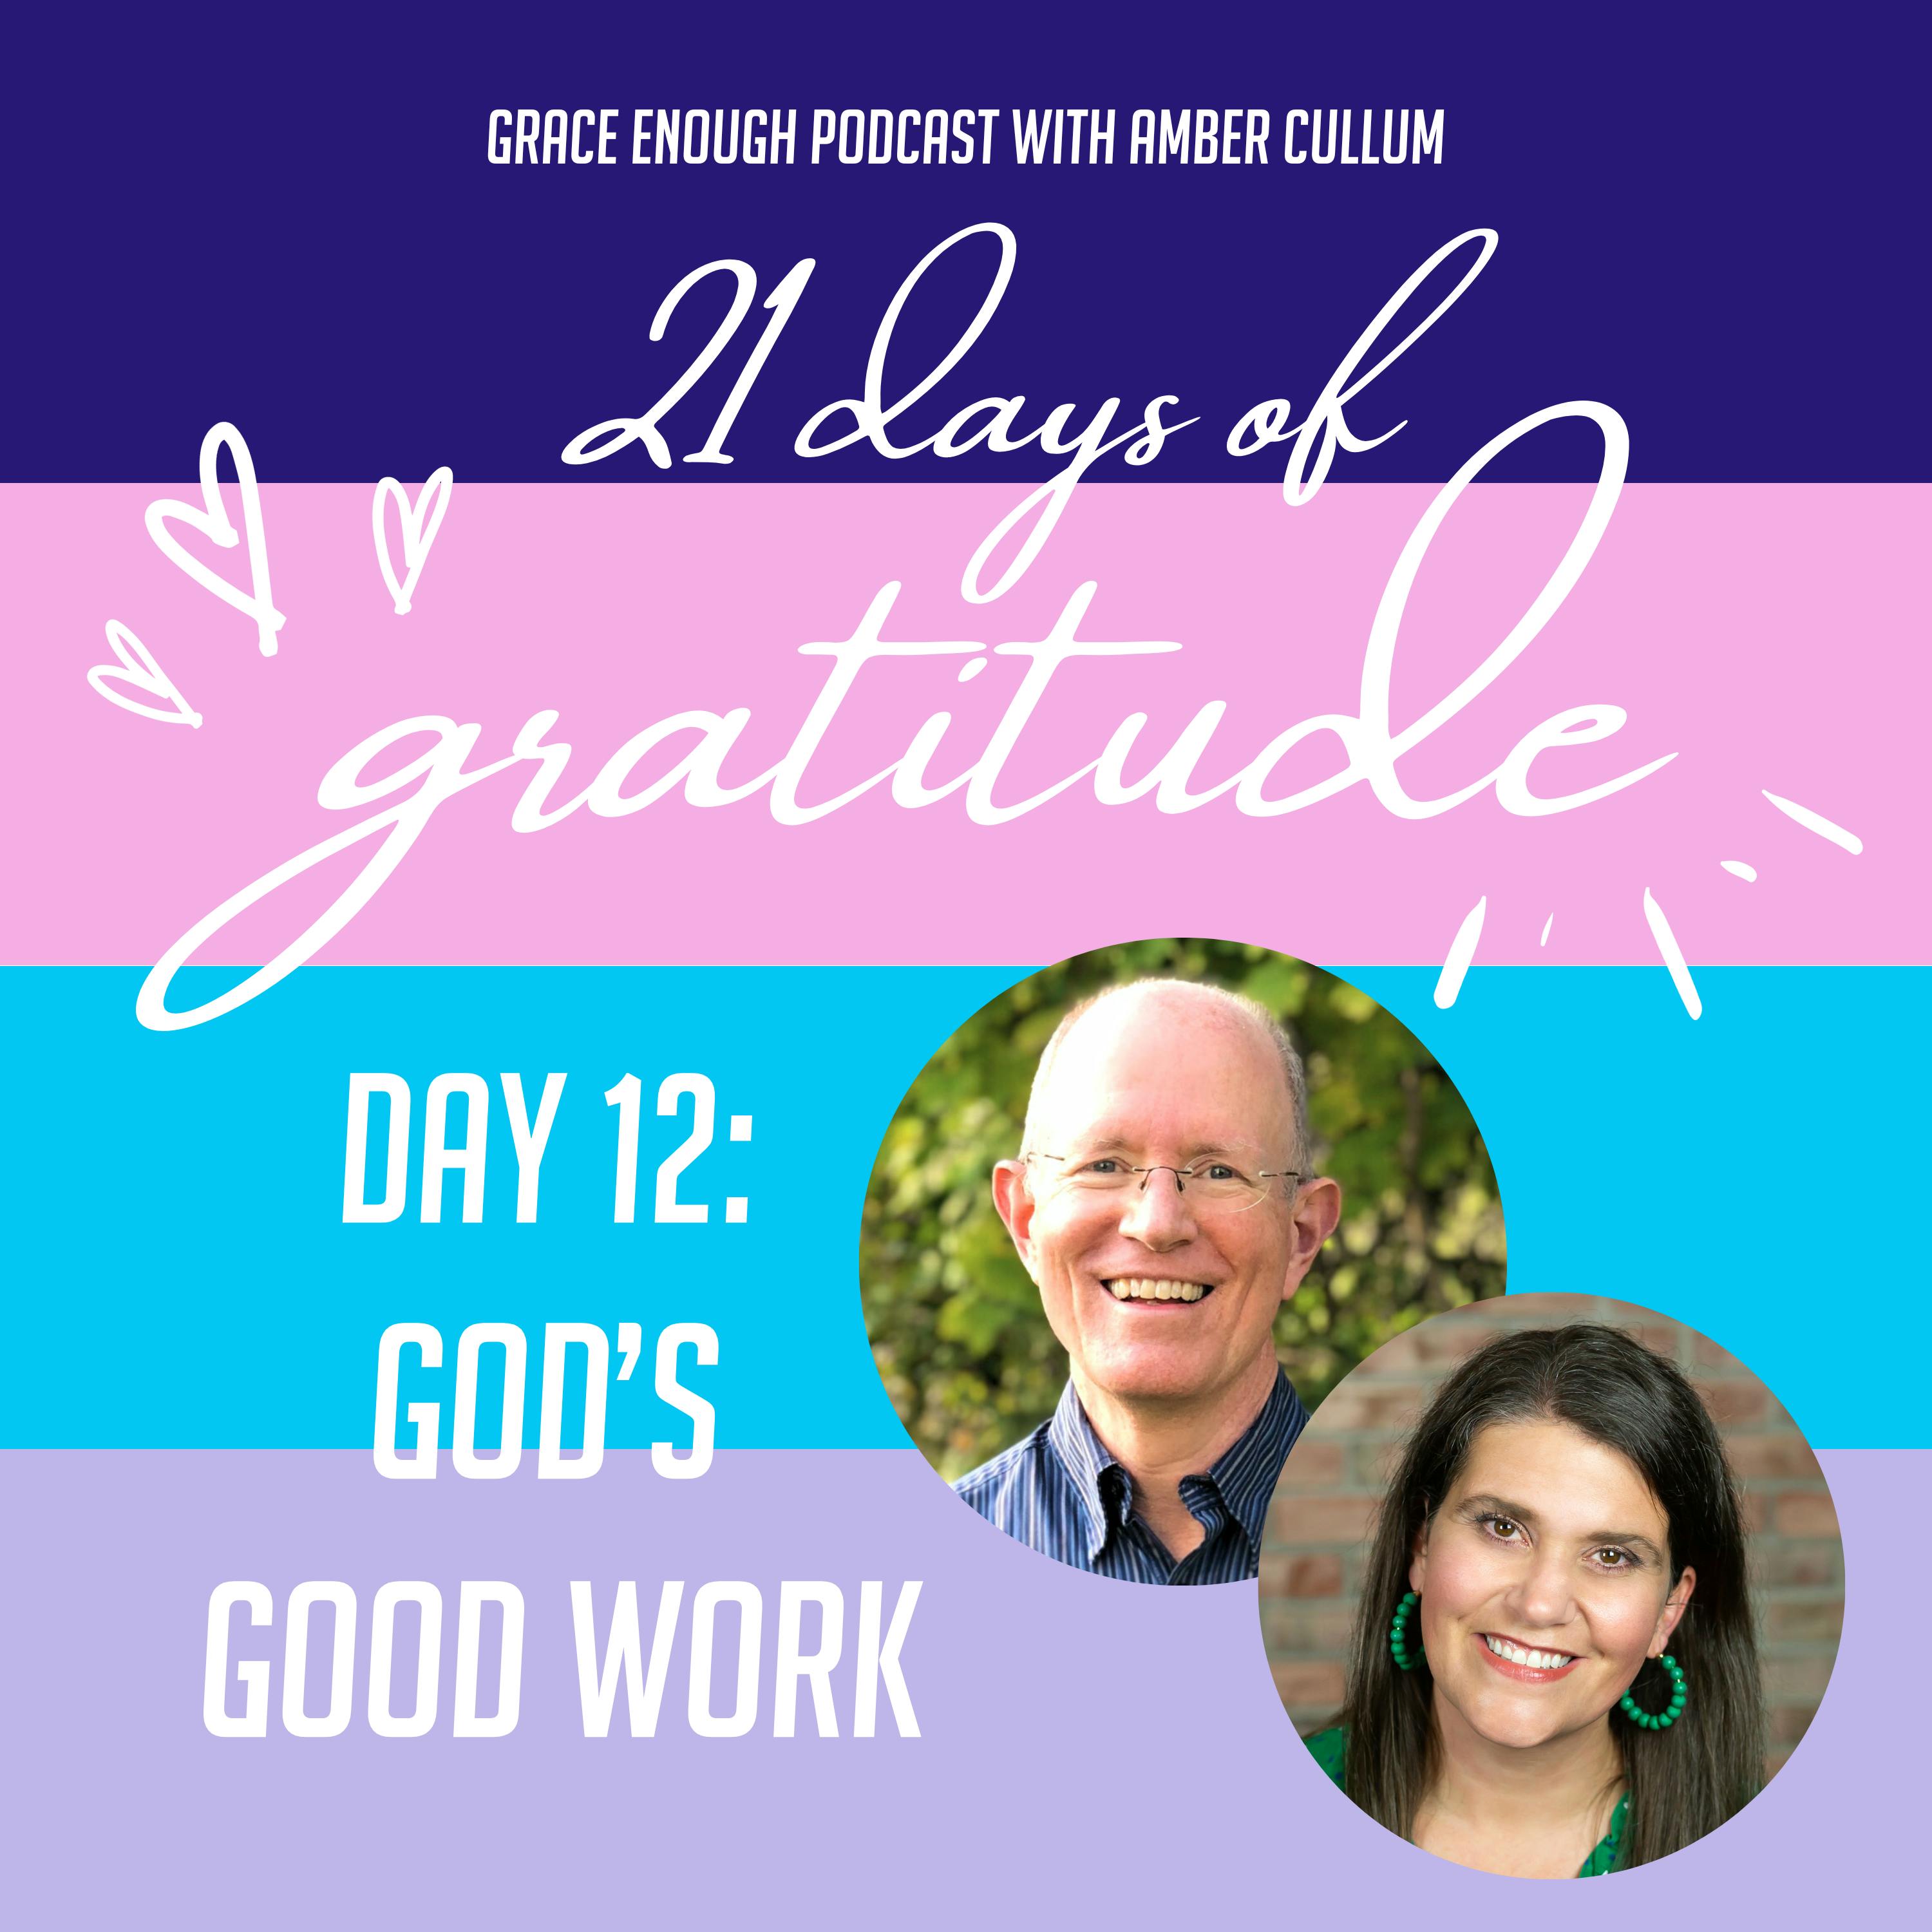 12/21 Days of Gratitude: God’s Good Work feat. James Early